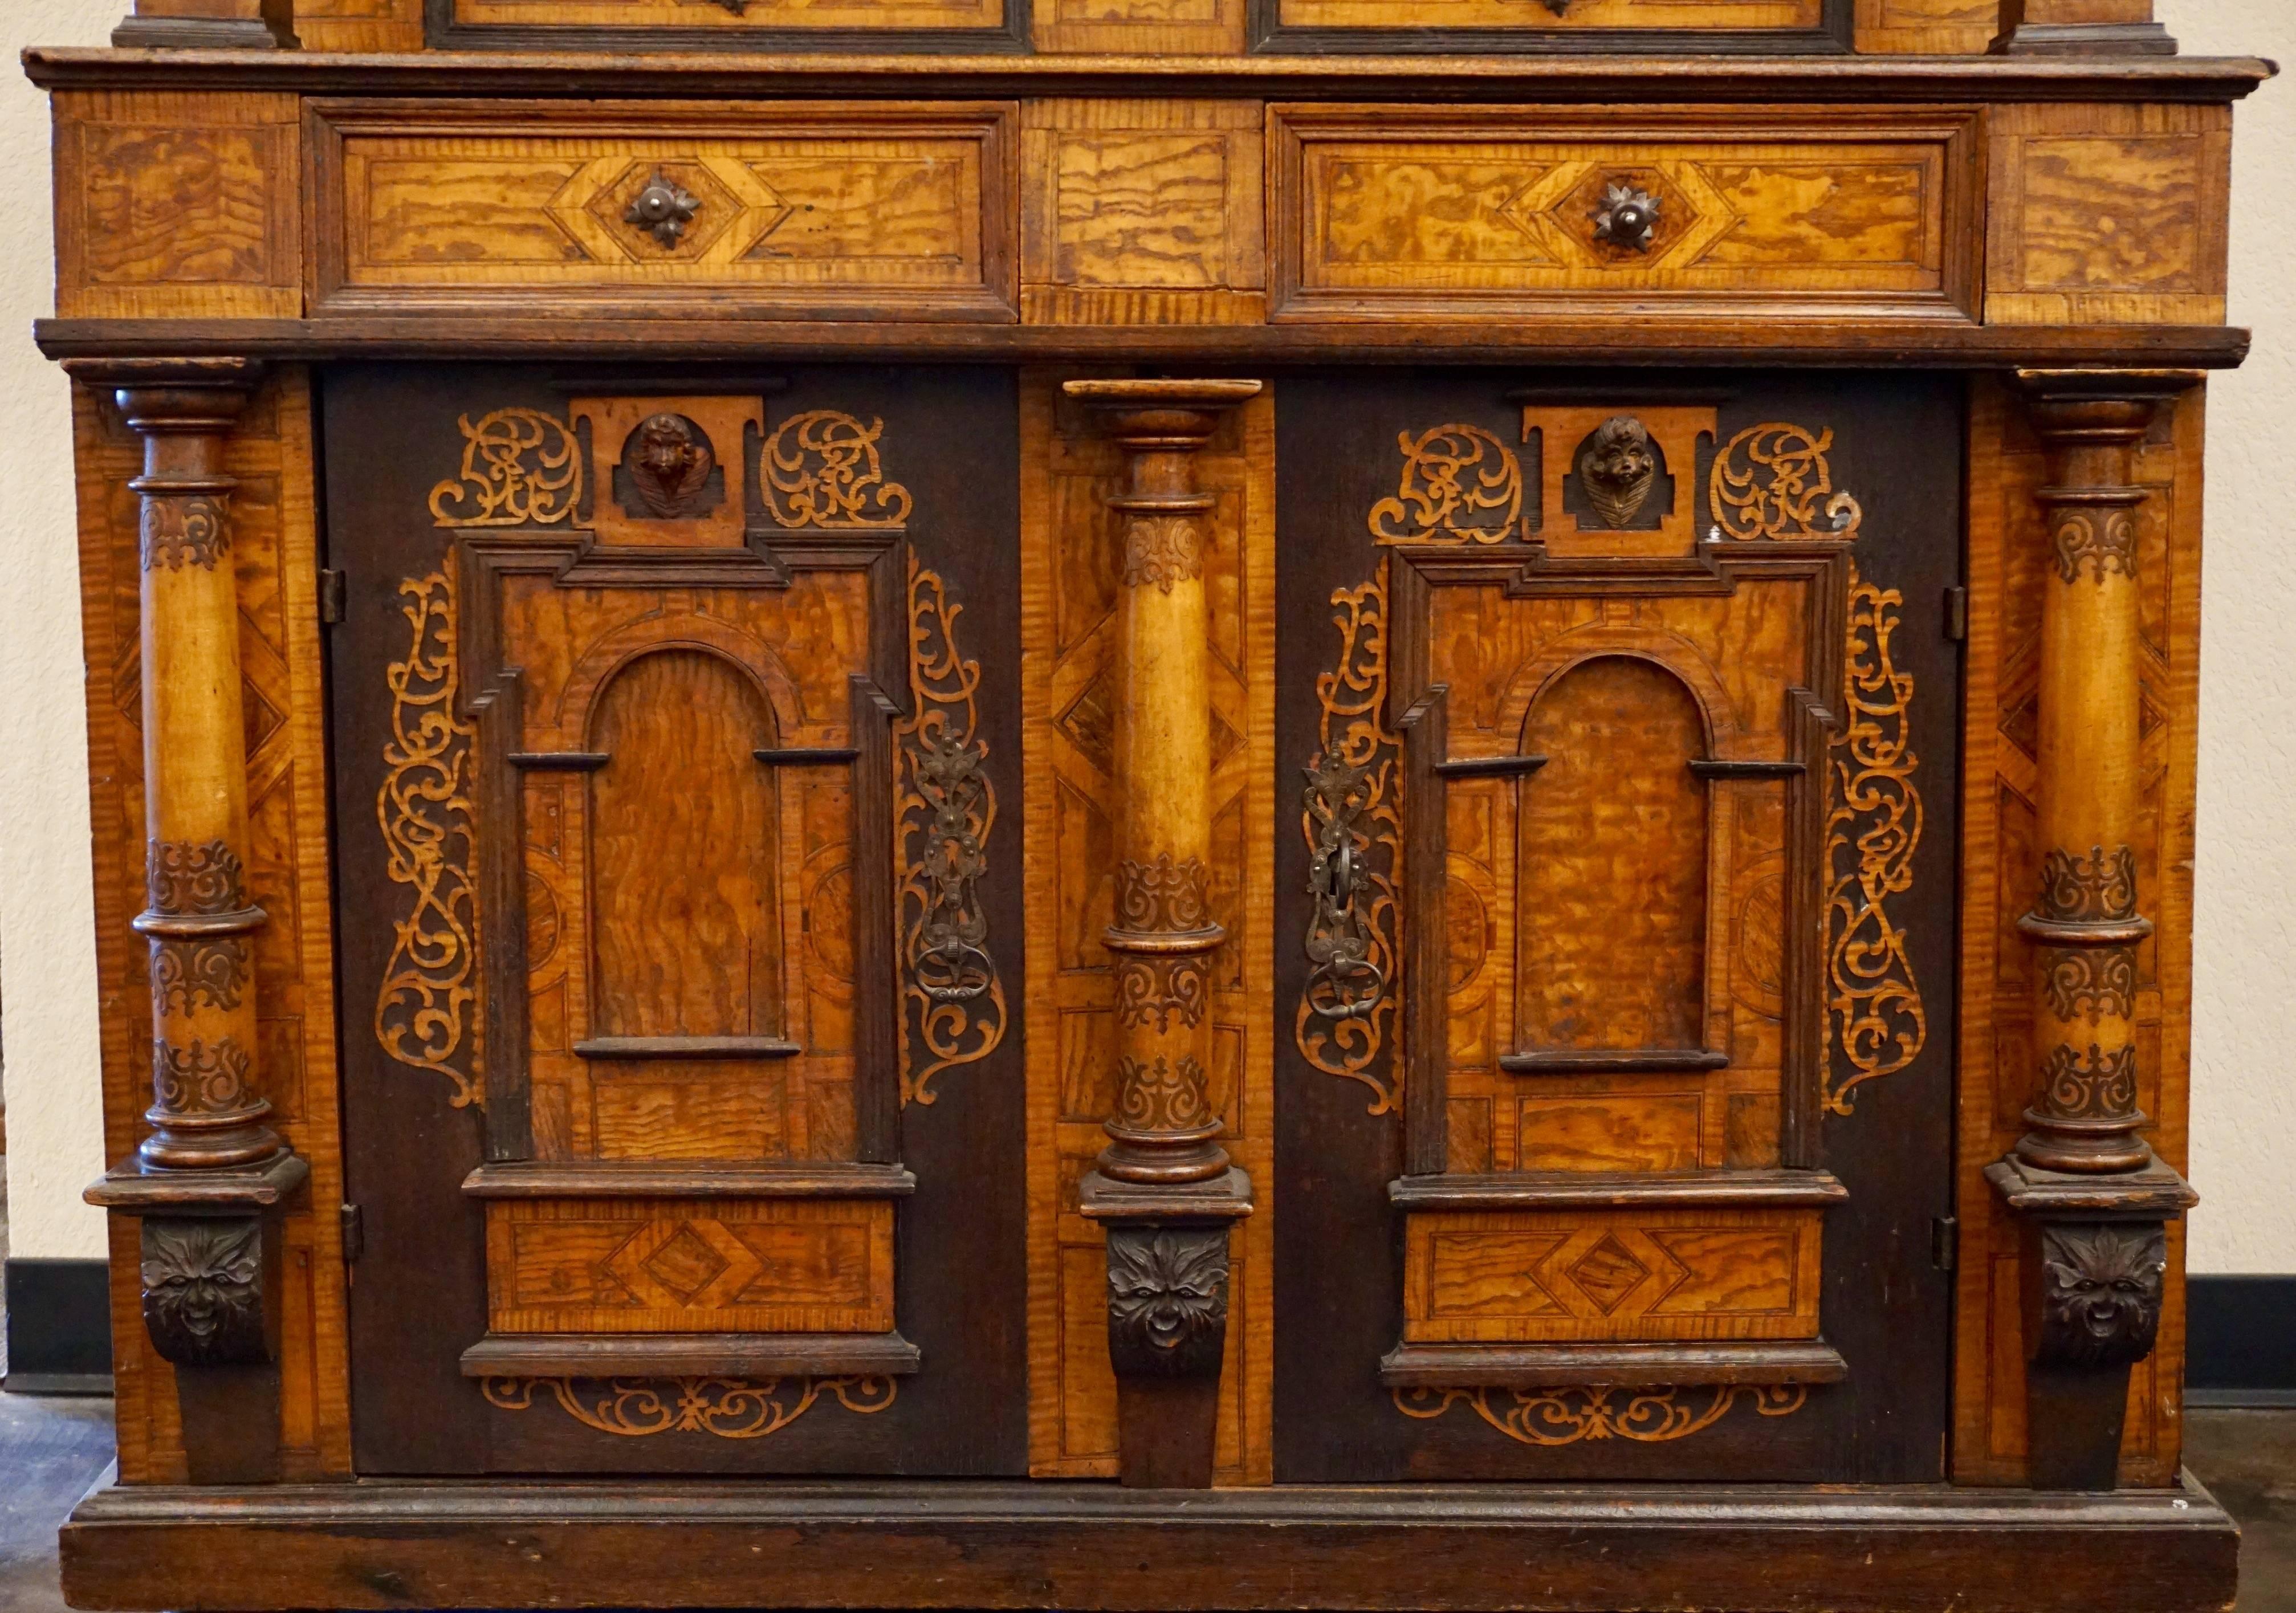 Hand-Crafted 18th-19th Century Inlaid Alsatian Deux Corps Sideboard Armoire, Louis XIV